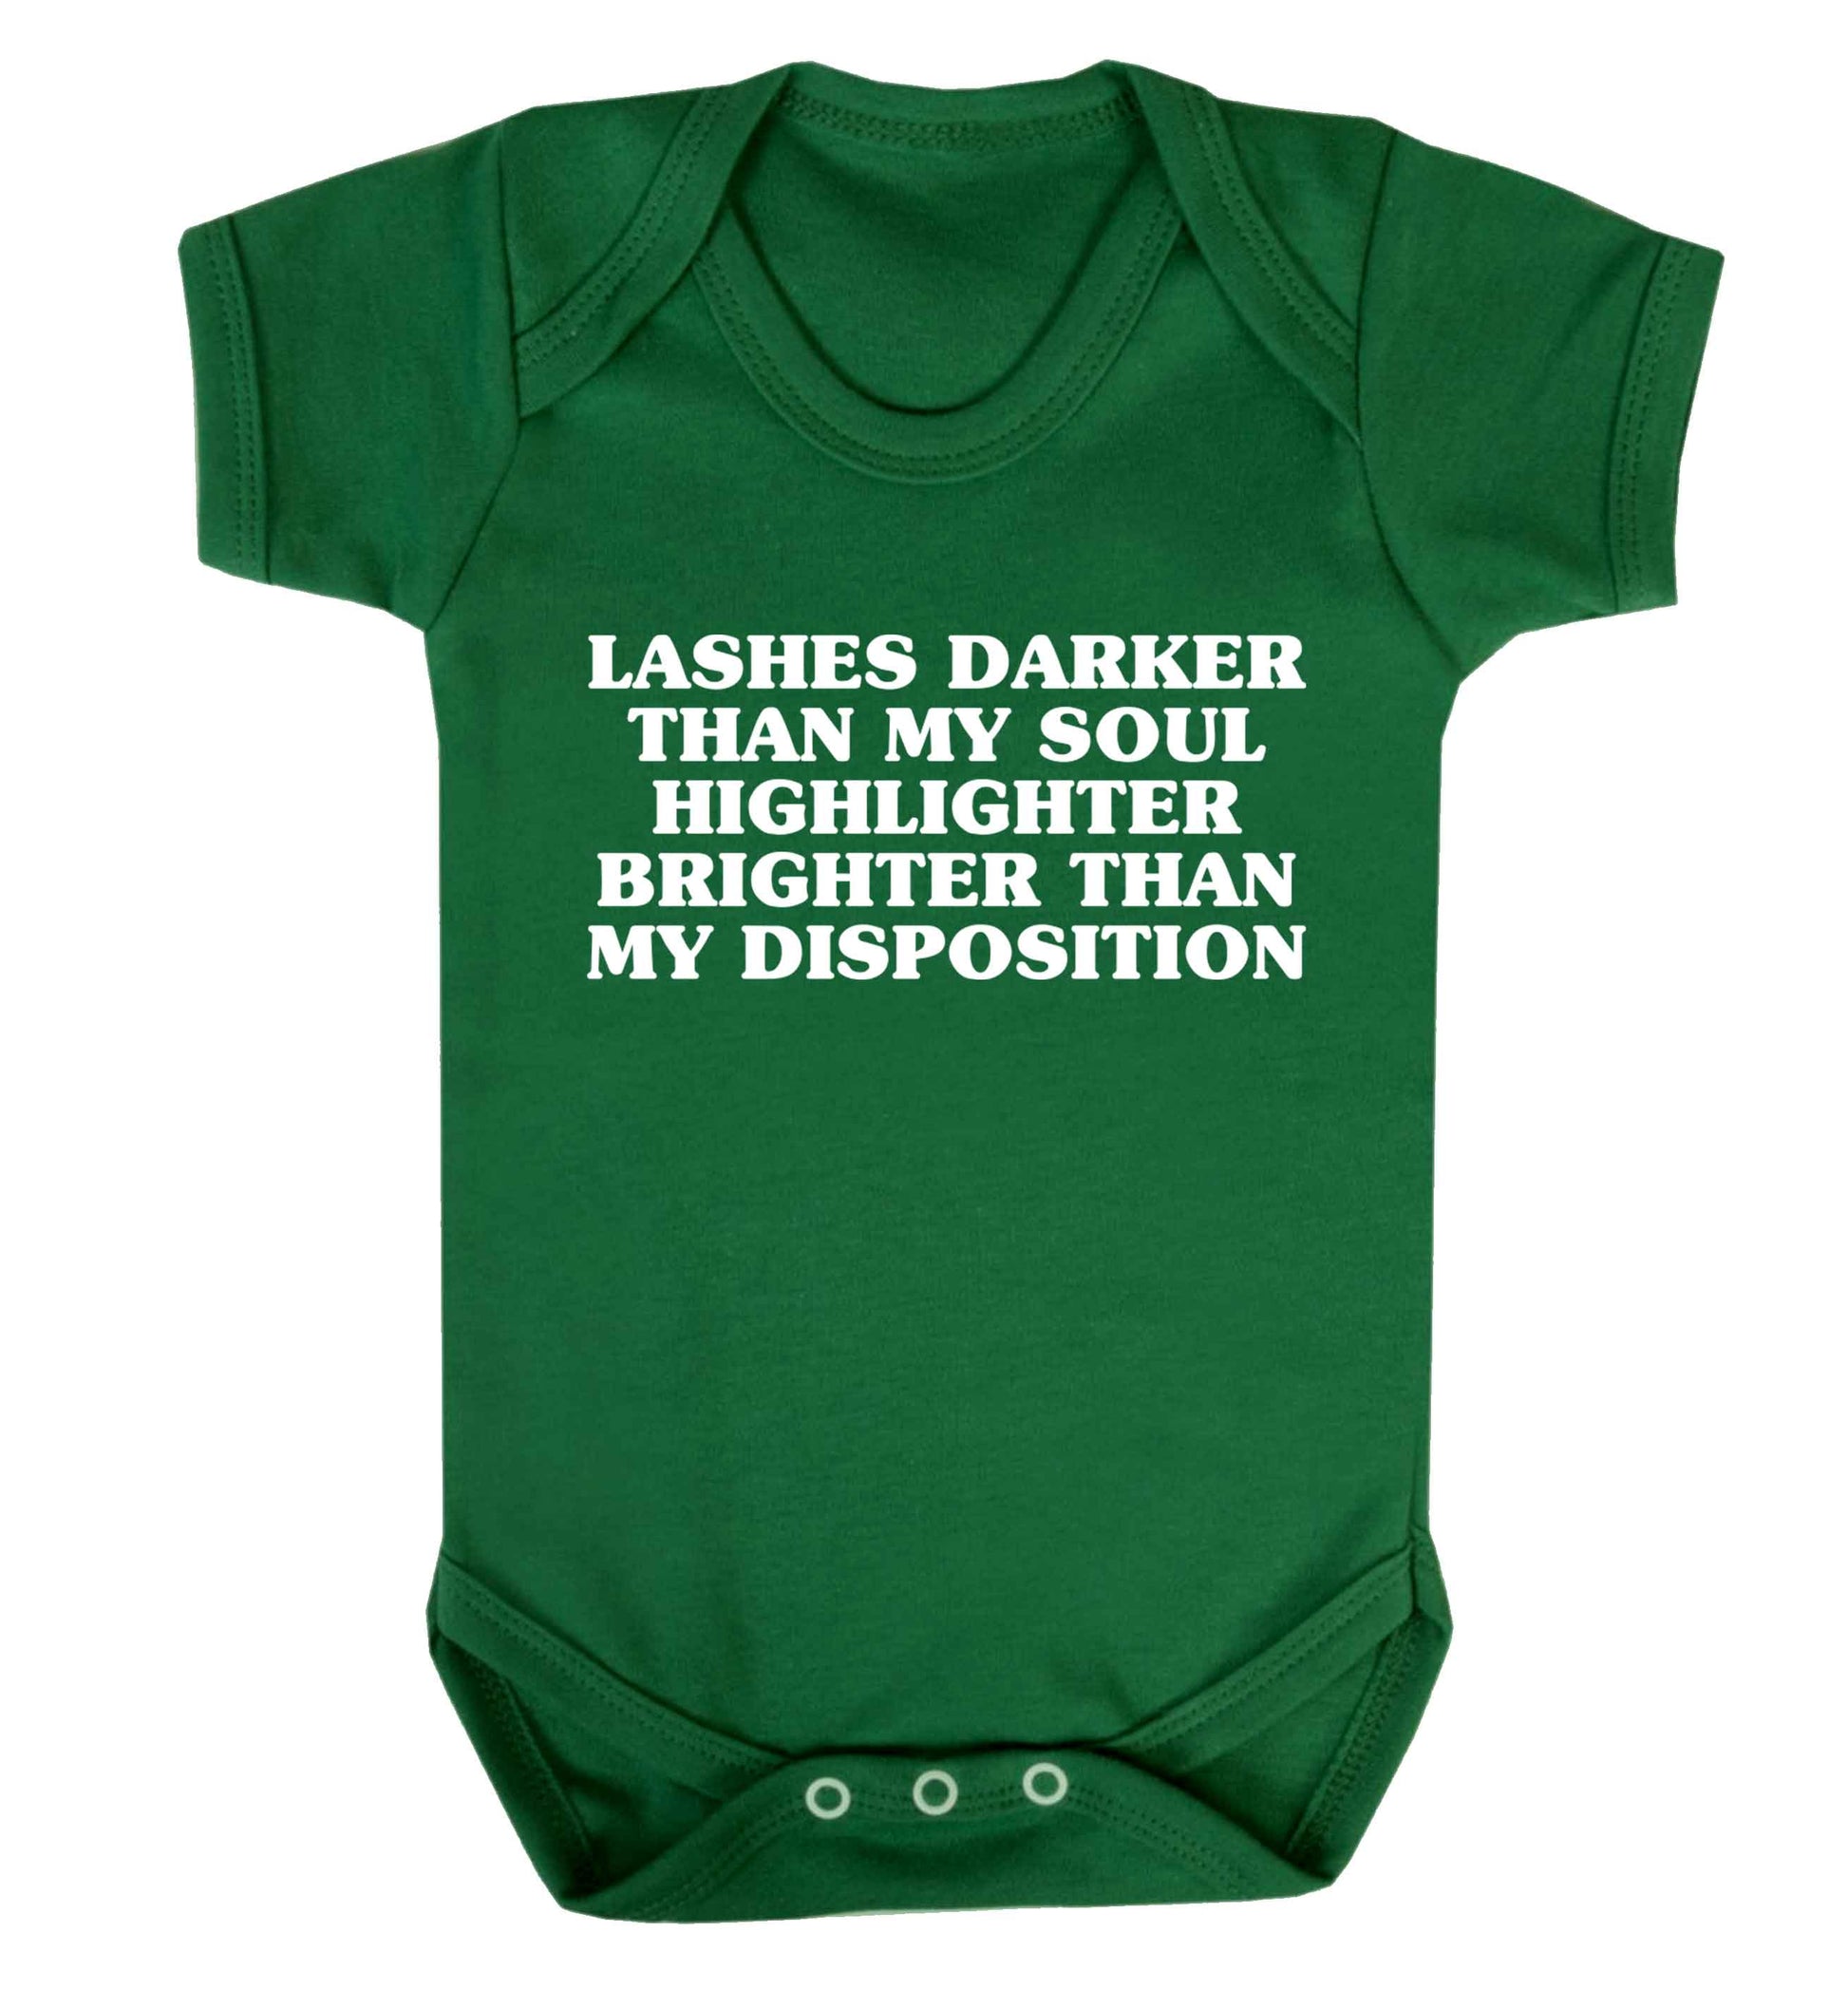 Lashes darker than my soul, highlighter brighter than my disposition Baby Vest green 18-24 months